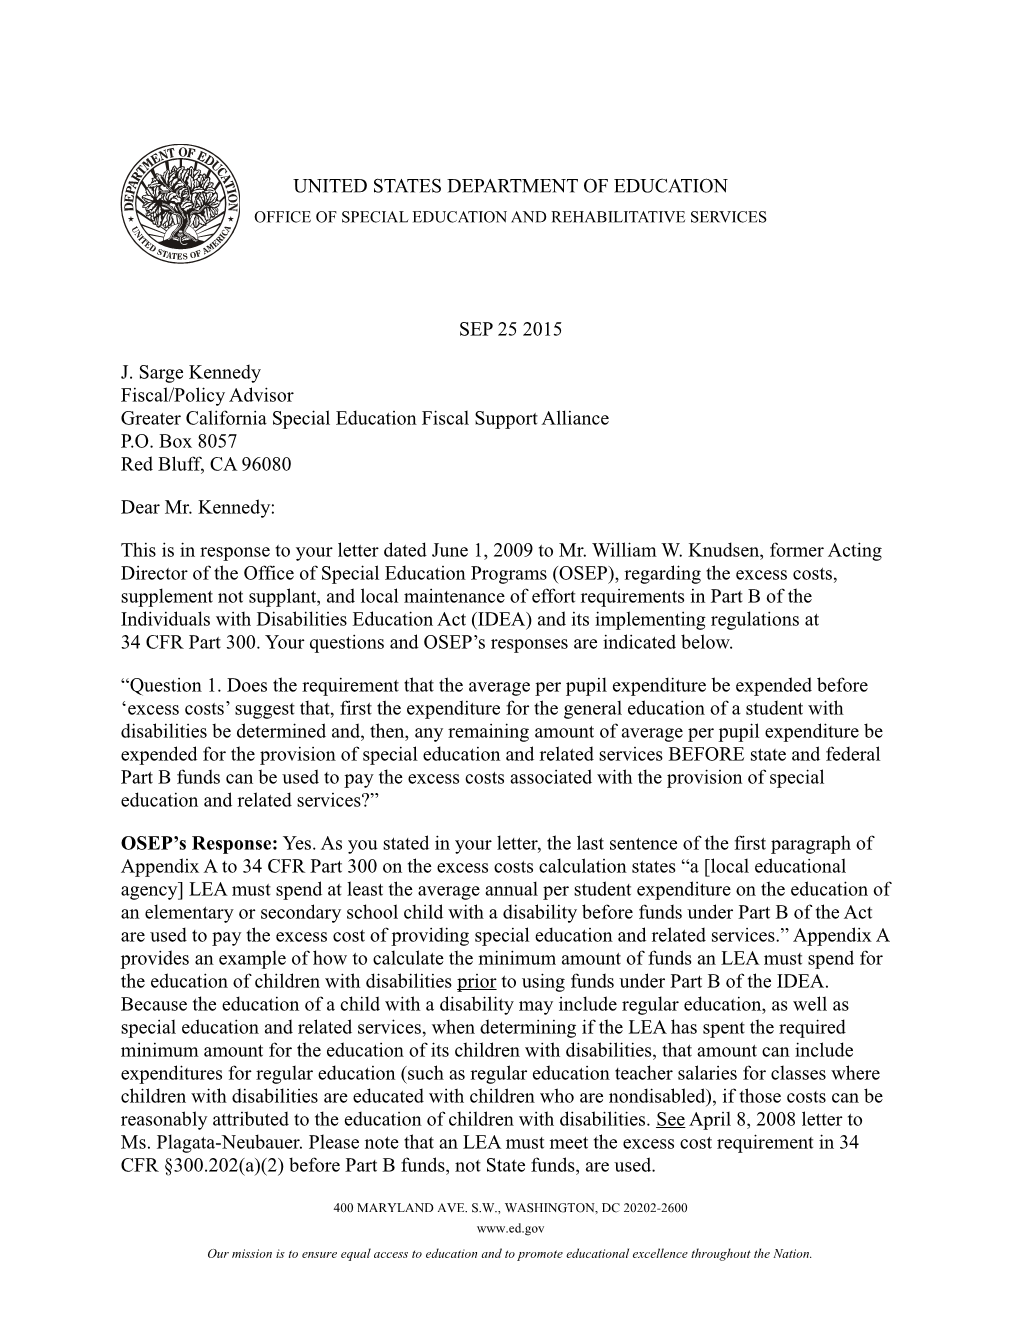 9-25-2009 OSEP Policy Letter to J. Sarge Kennedy (MS Word)